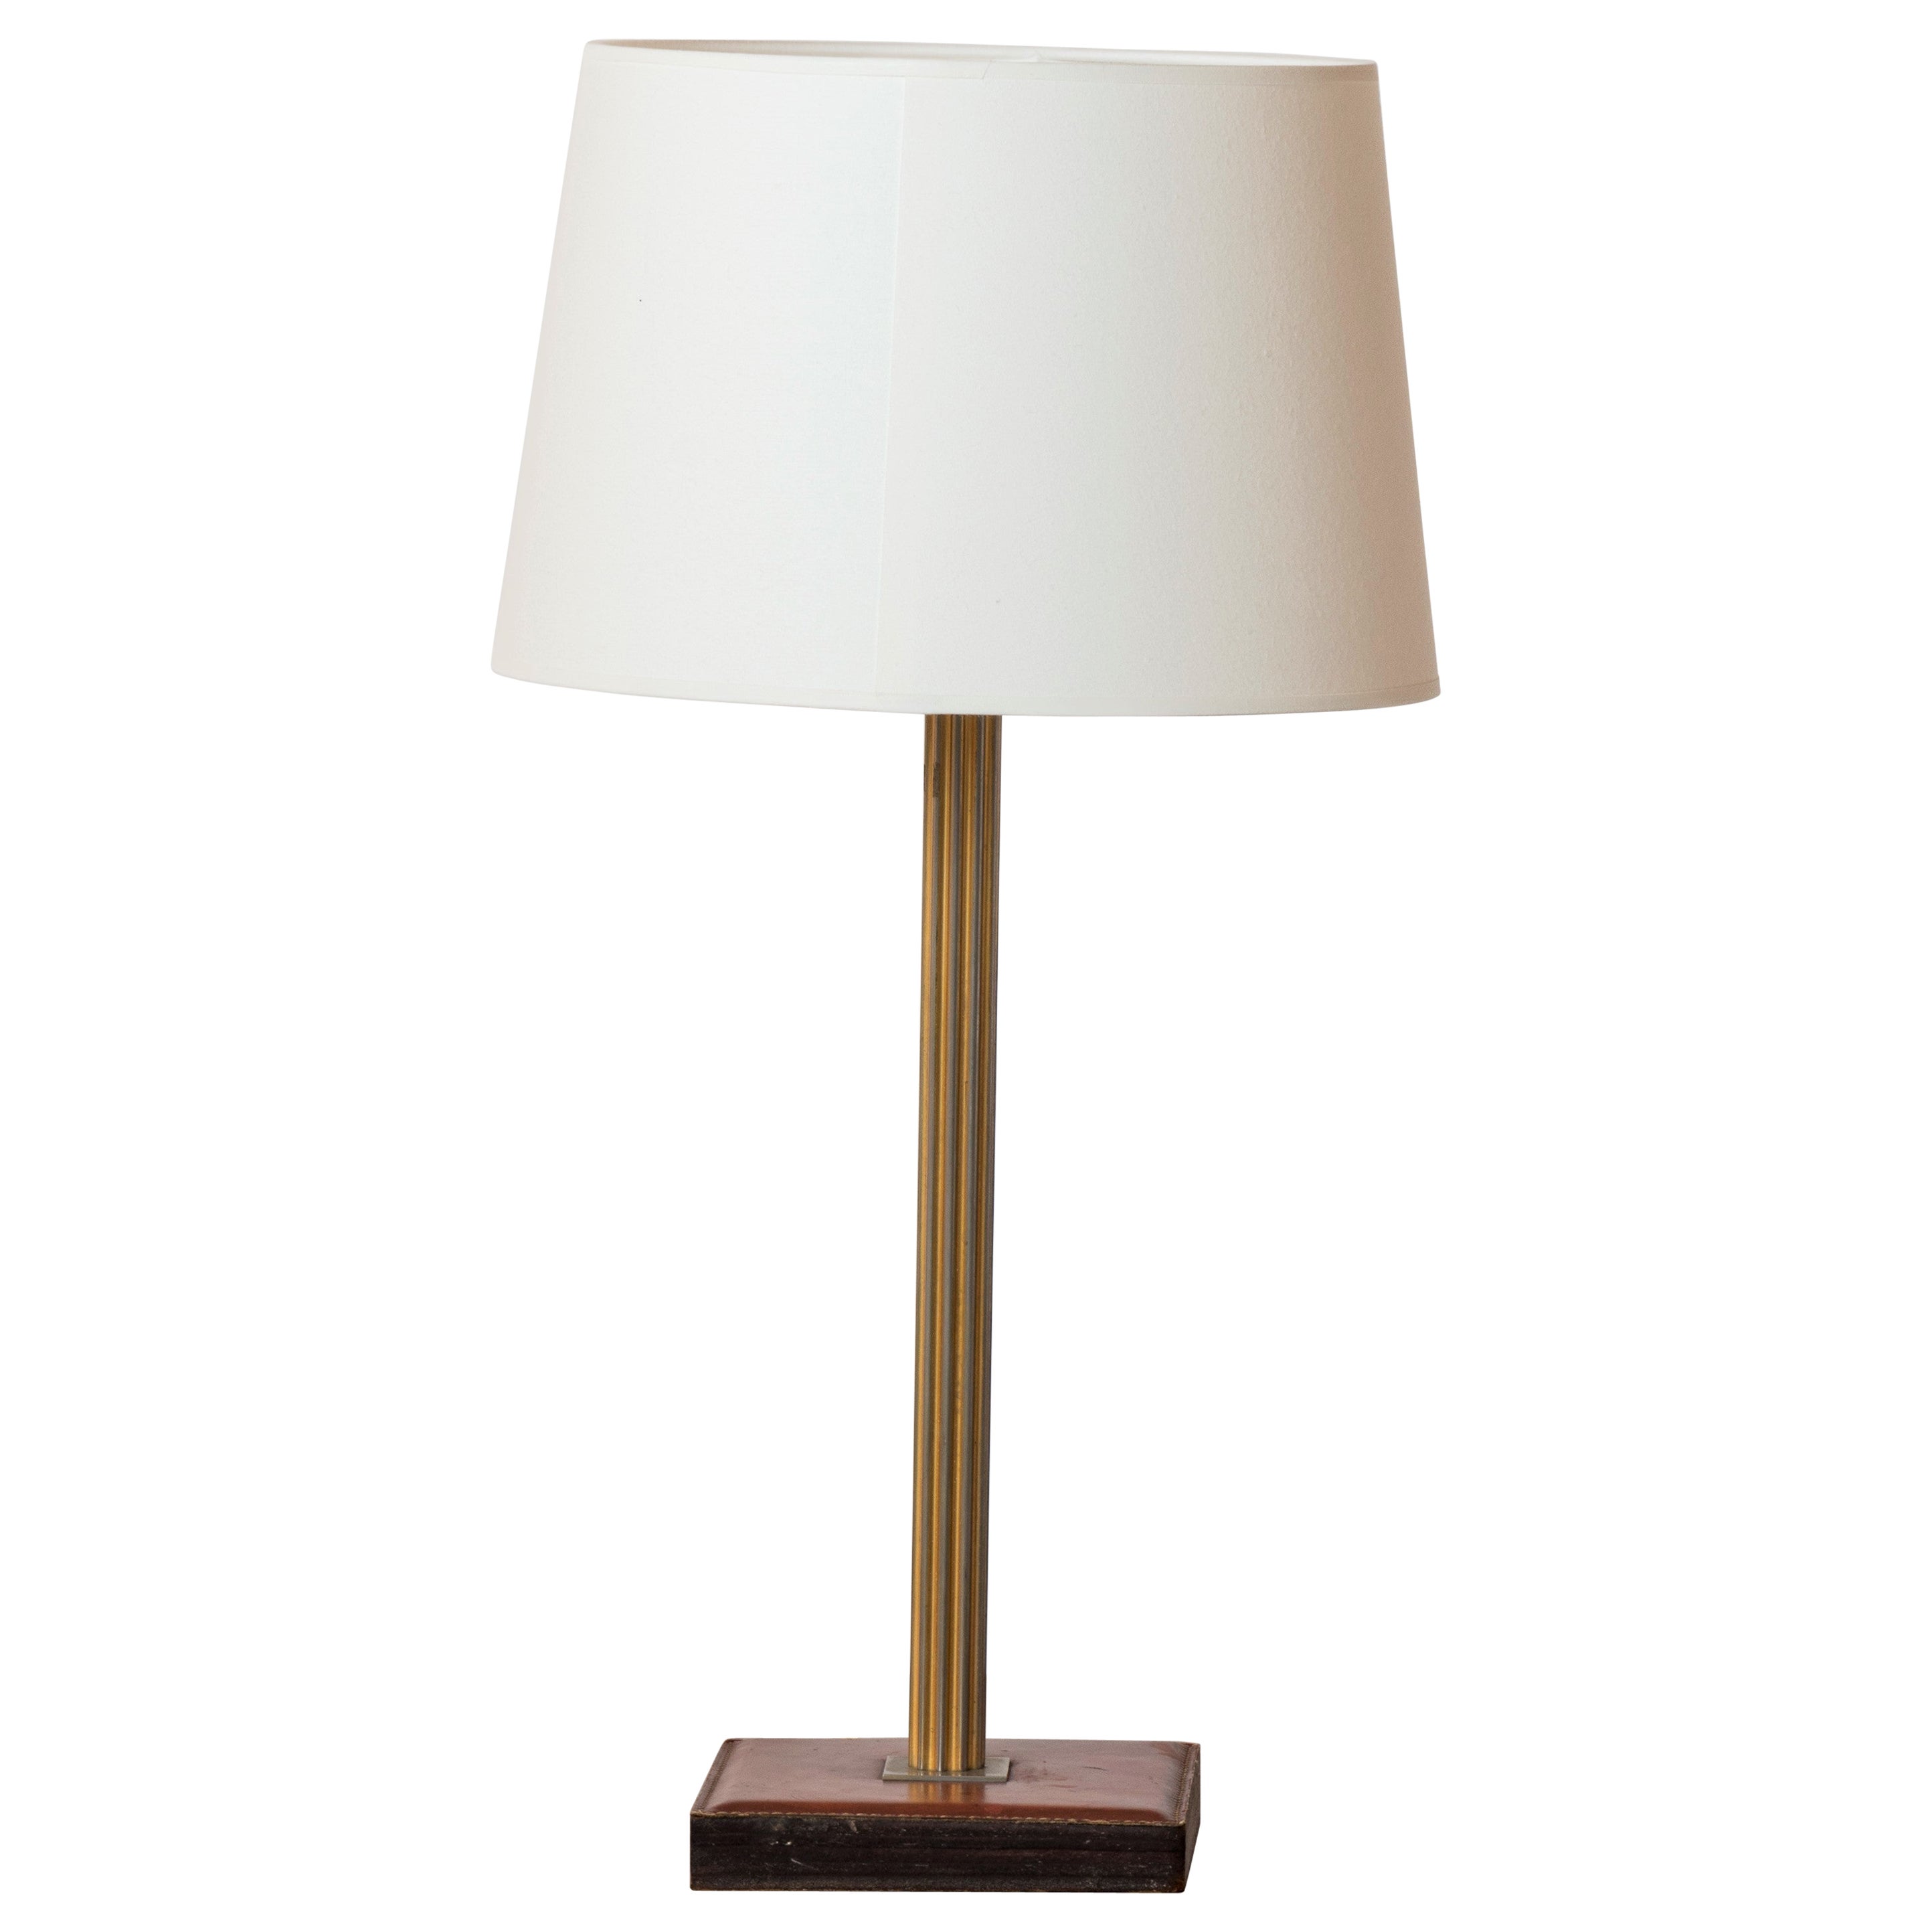 Cognac Leather Base and Brass Table Lamp by Delvaux, Belgium 1960s